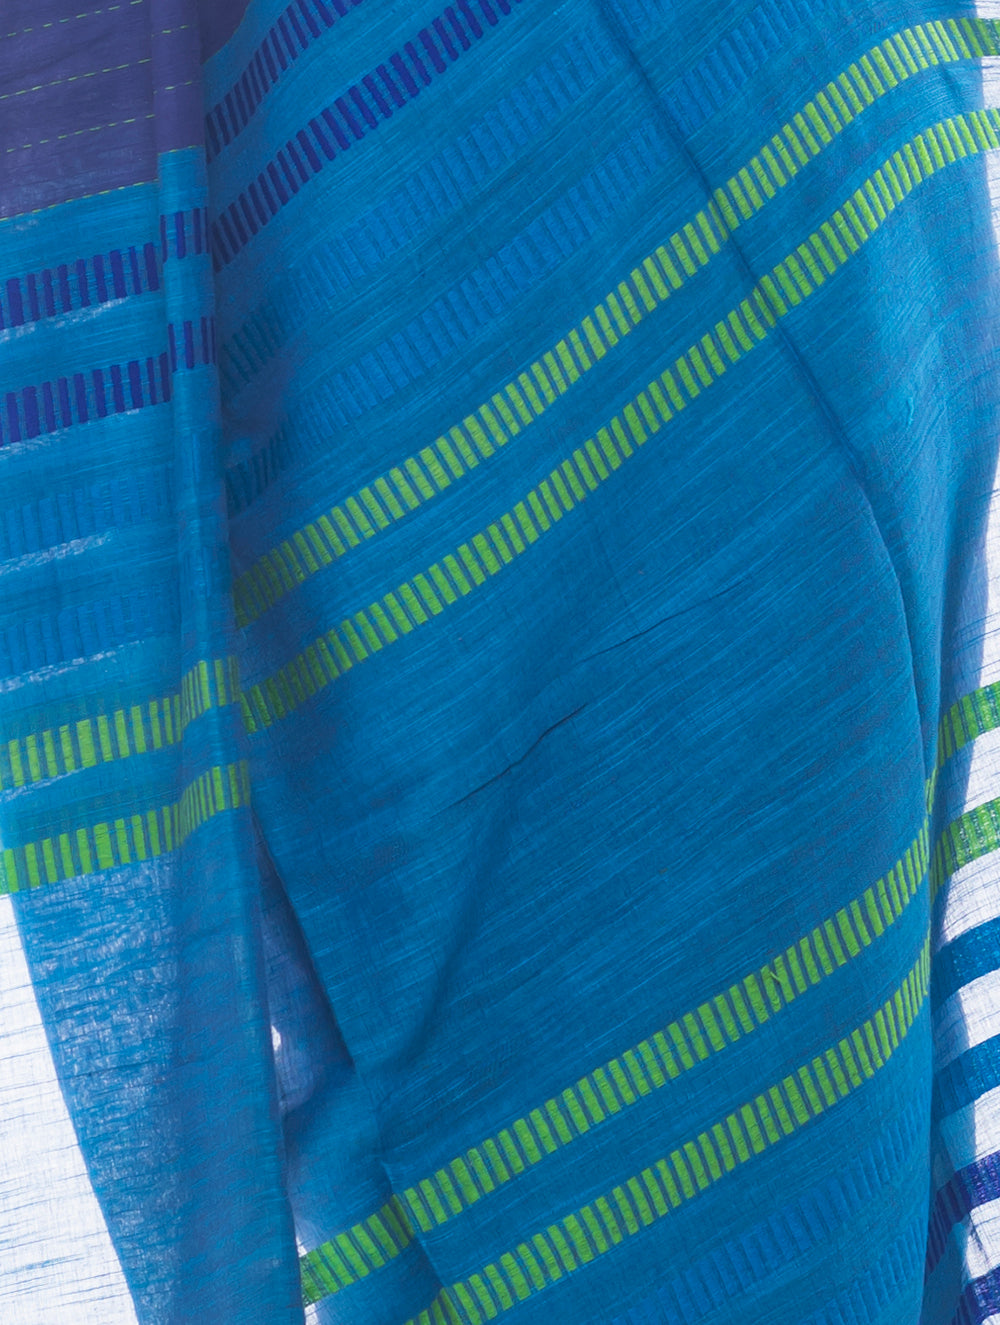 Load image into Gallery viewer, Soft Bengal Handwoven Khadi Cotton Saree - Blue &amp; Green 